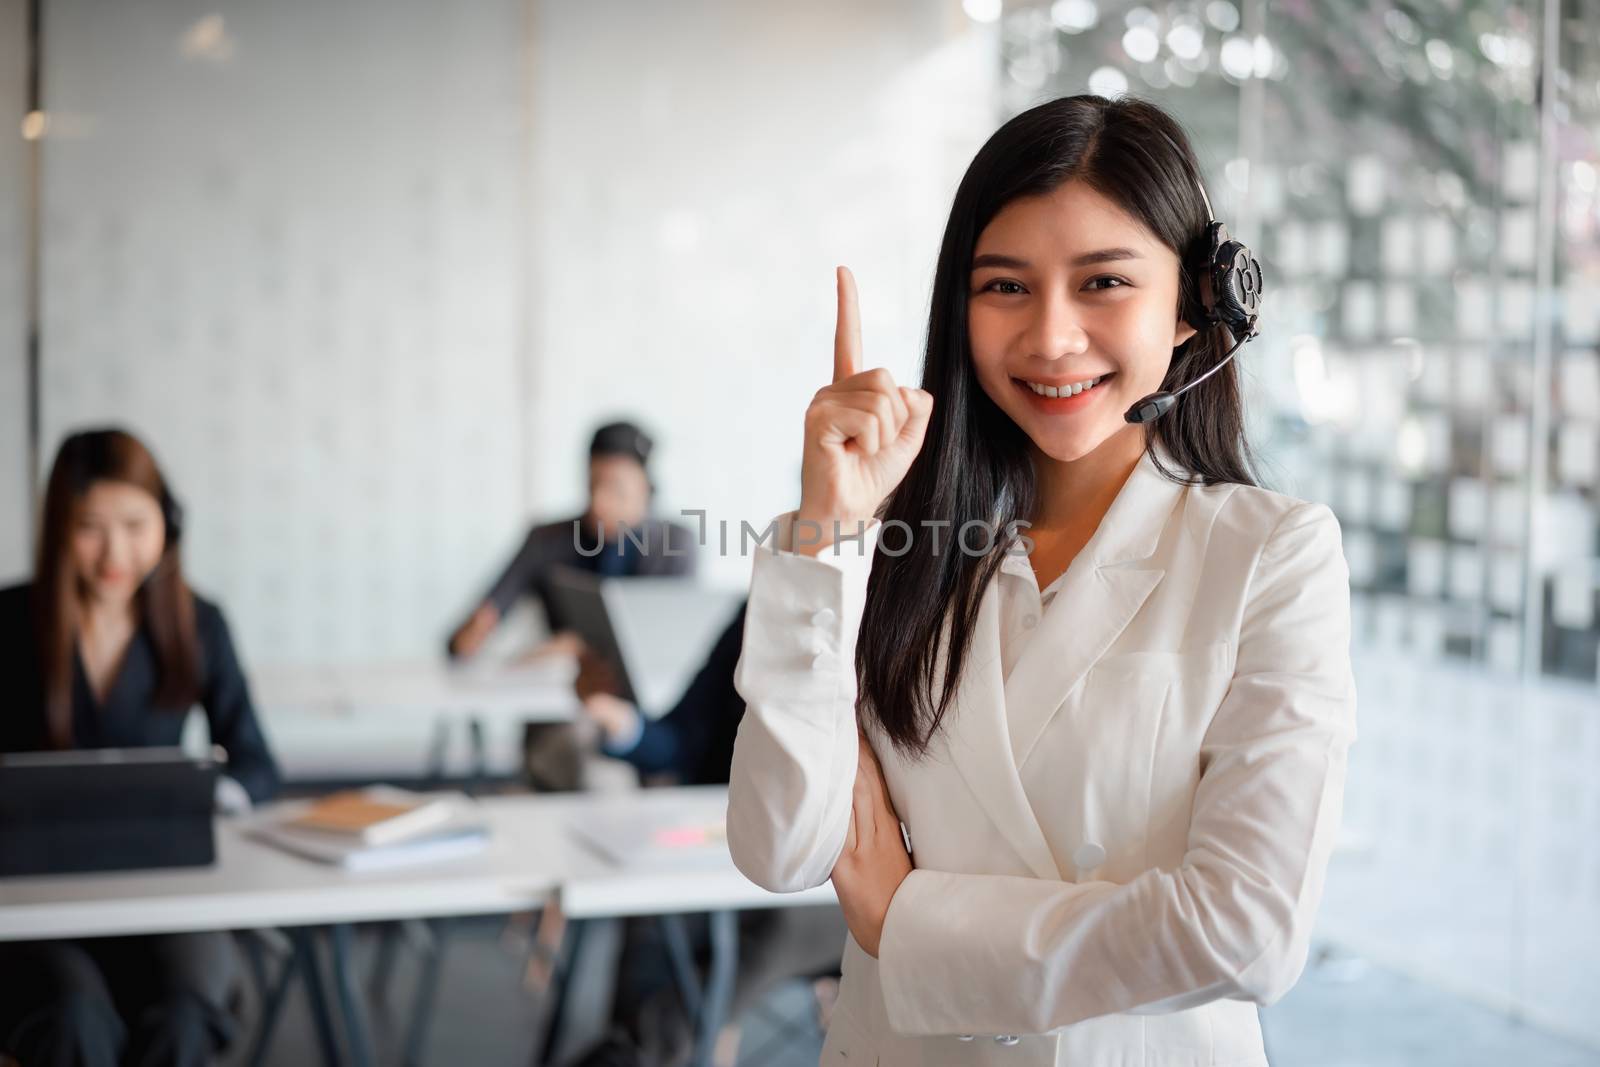 Confident female customer services agent with headset working in a call center office. Customer service team support concept